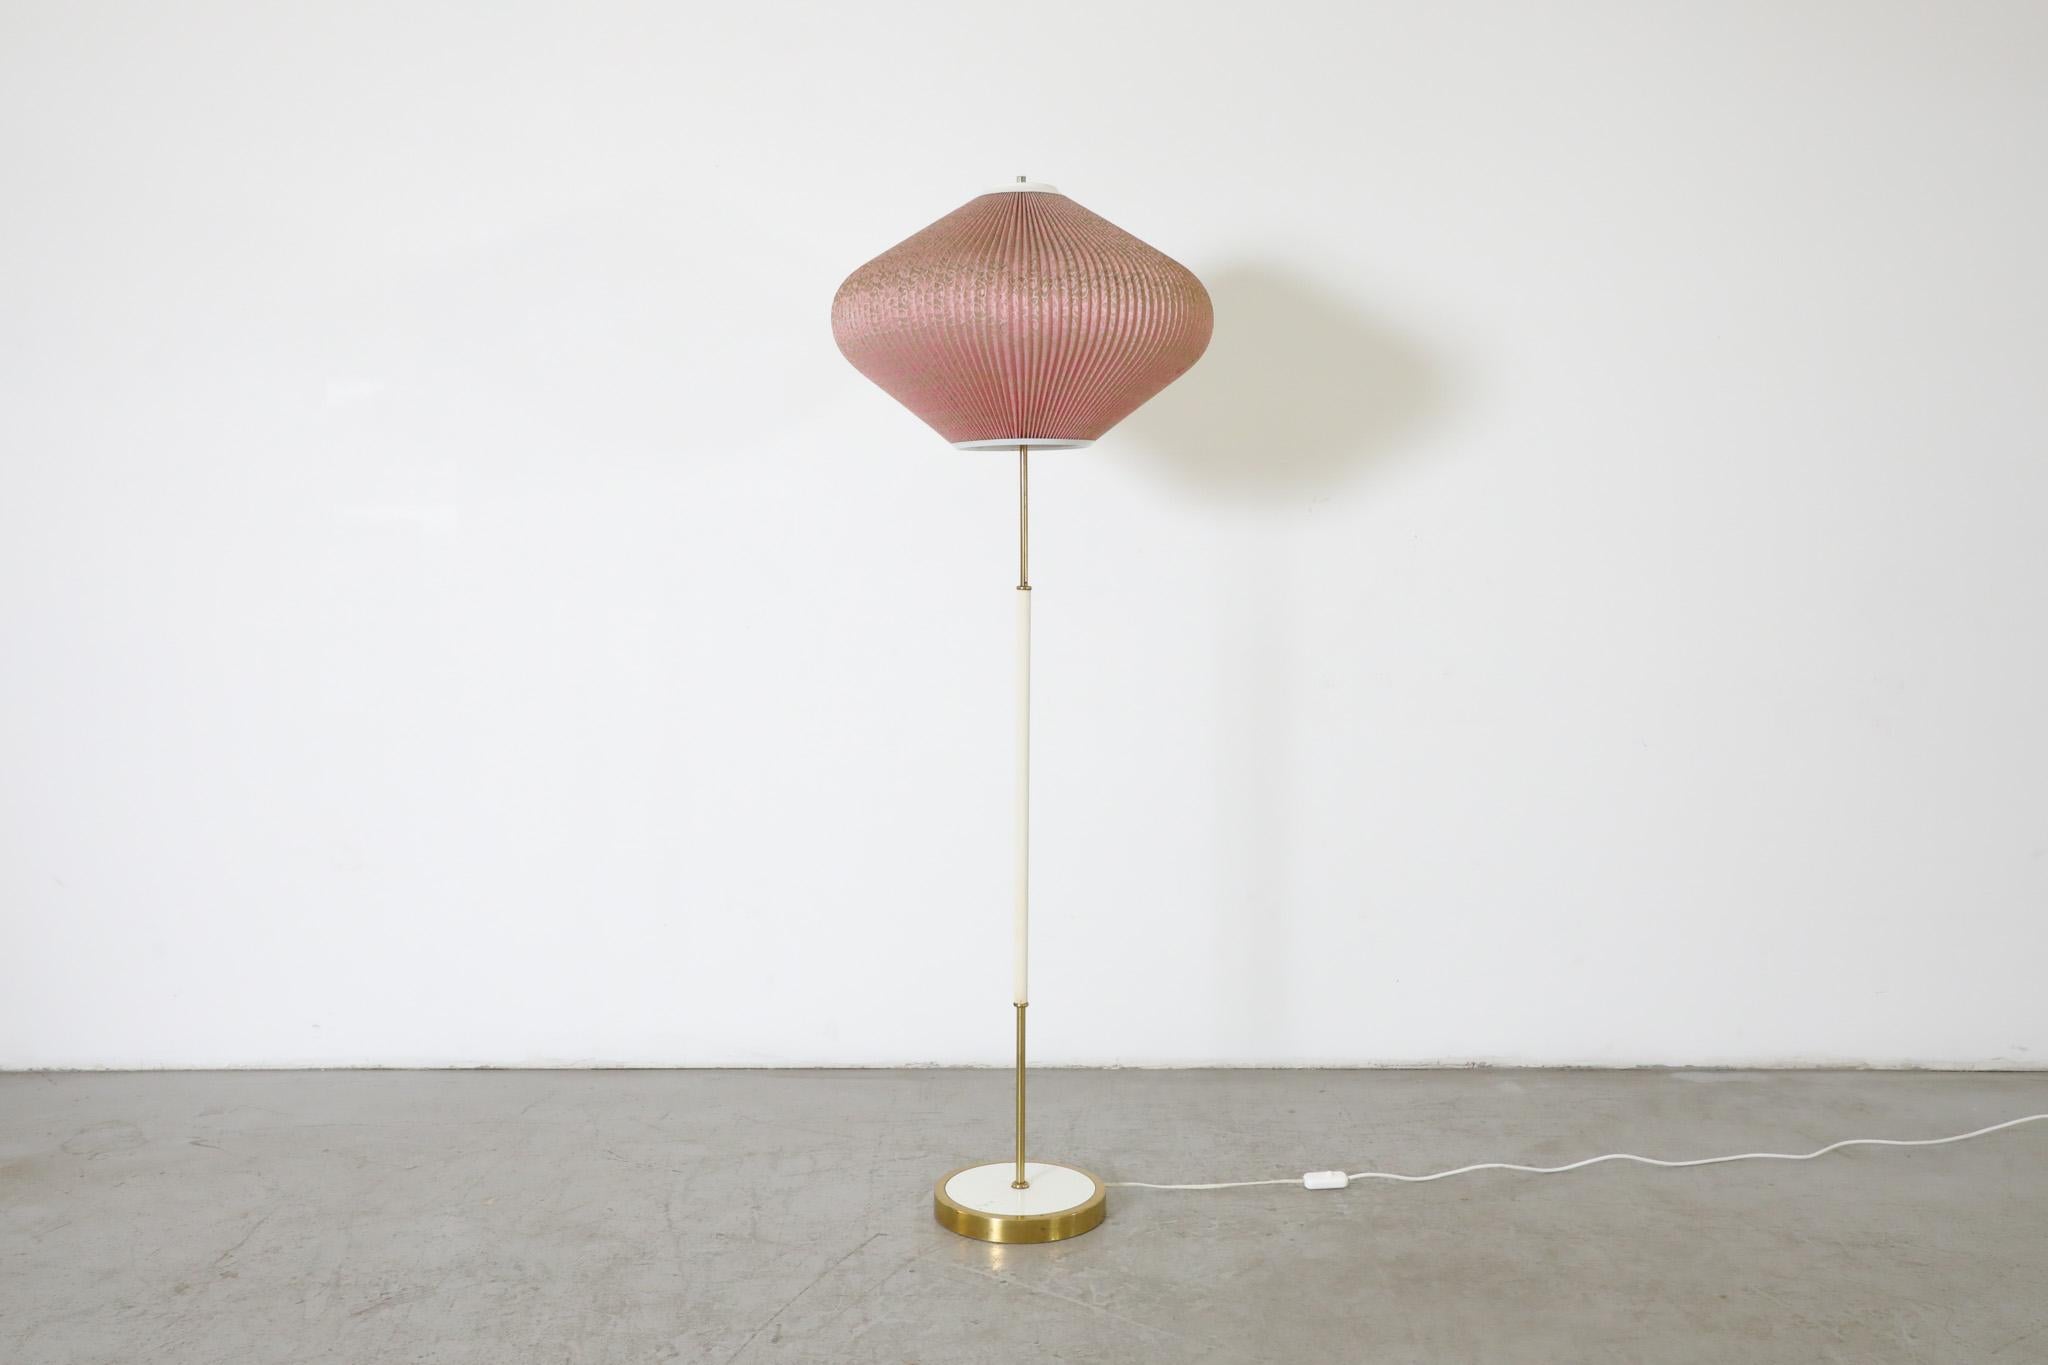 Mid-Century, 1960s Rispal inspired white enameled metal and brass floor lamp with pink pleated lace lampshade. The lampshade is a lace infused pleated plastic and in good original condition. The stem and base have visible wear, including scratching,